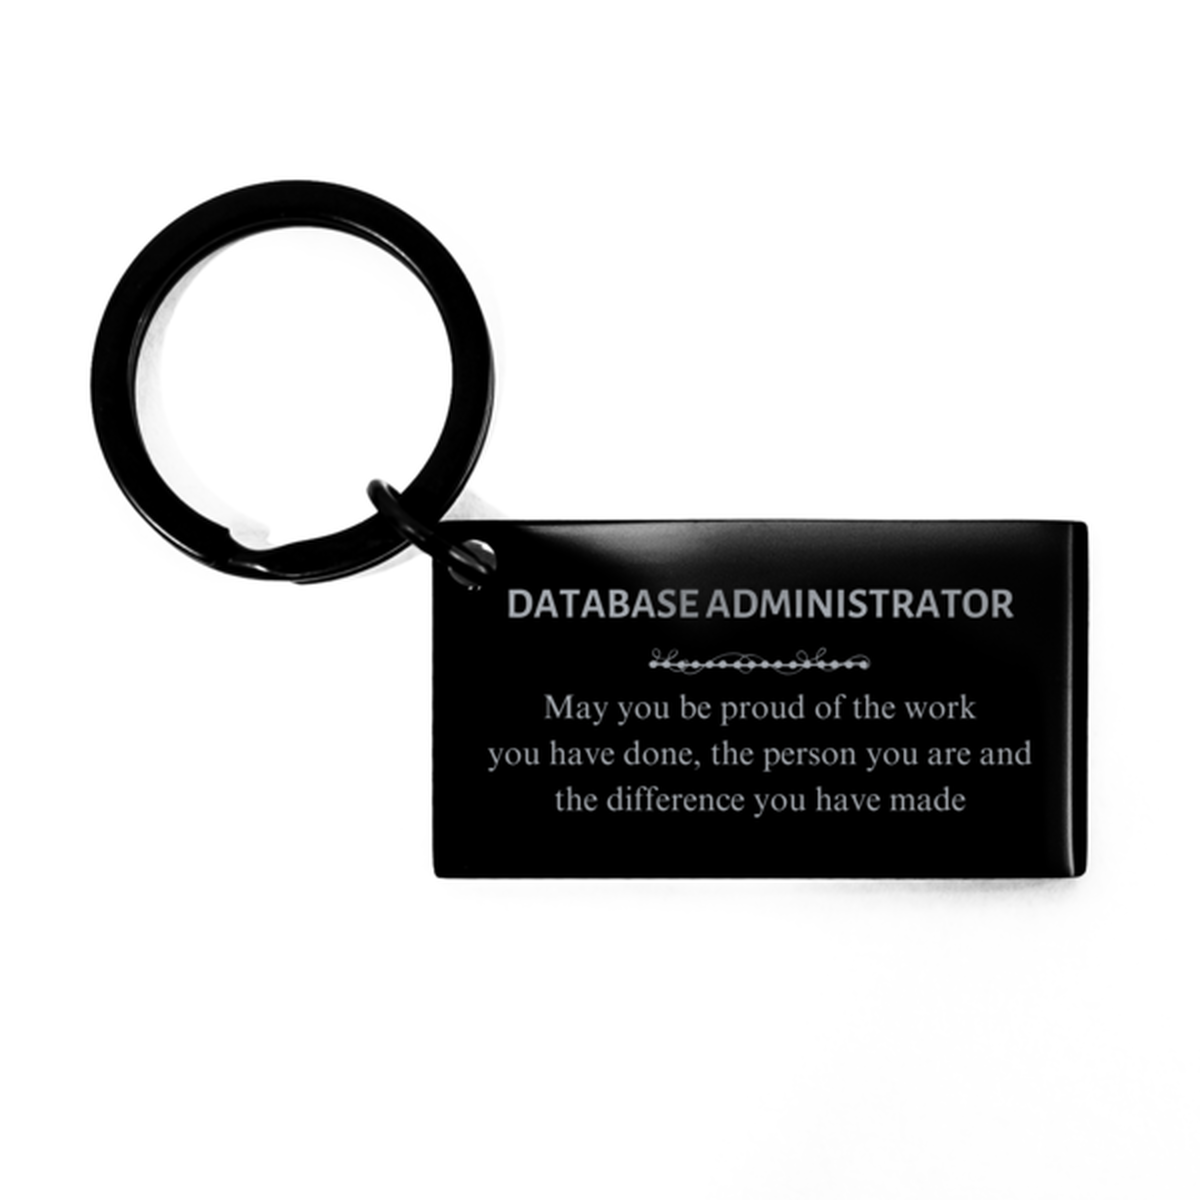 Funeral Director May you be proud of the work you have done, Retirement Database Administrator Keychain for Colleague Appreciation Gifts Amazing for Database Administrator